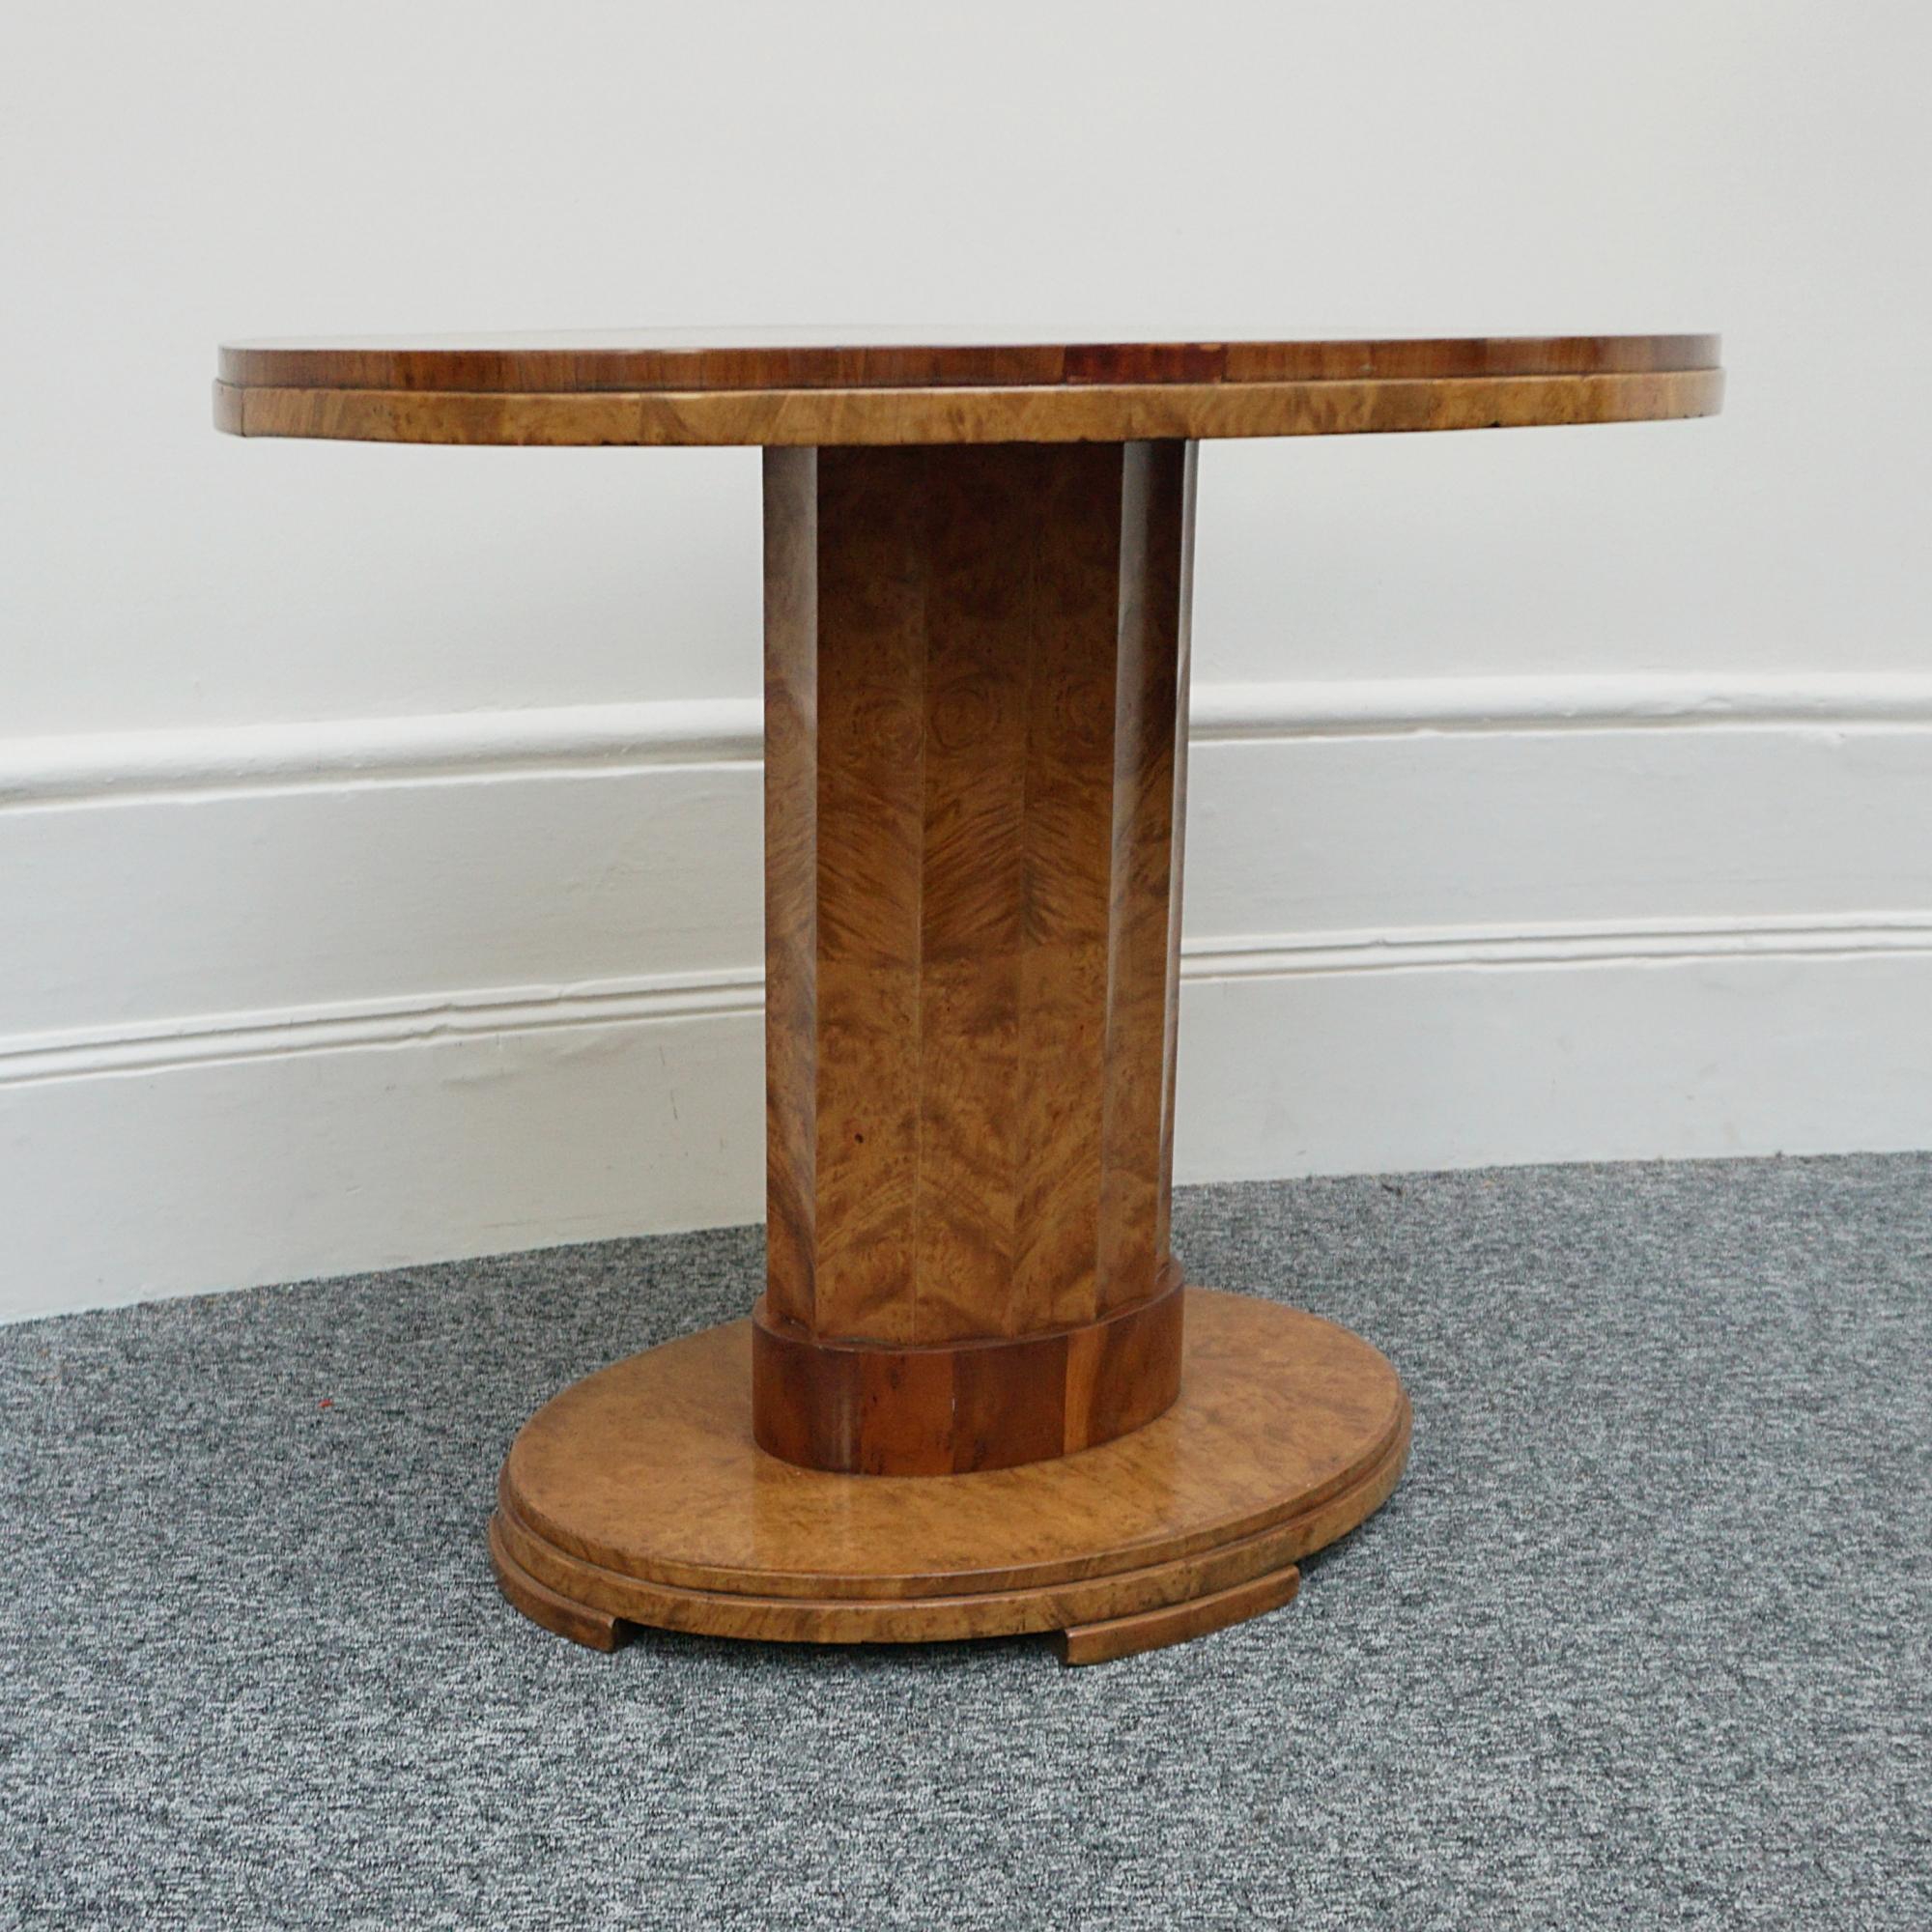 An Art Deco centre table by Harry & Lou Epstein. Veneered walnut oval table with fluted central column set over an oval, stepped base. Elm Banding to bottom of stem. 

Dimensions: H 74.5cm W 91cm D 73cm

Origin: English

Date: Circa 1935

Item No: